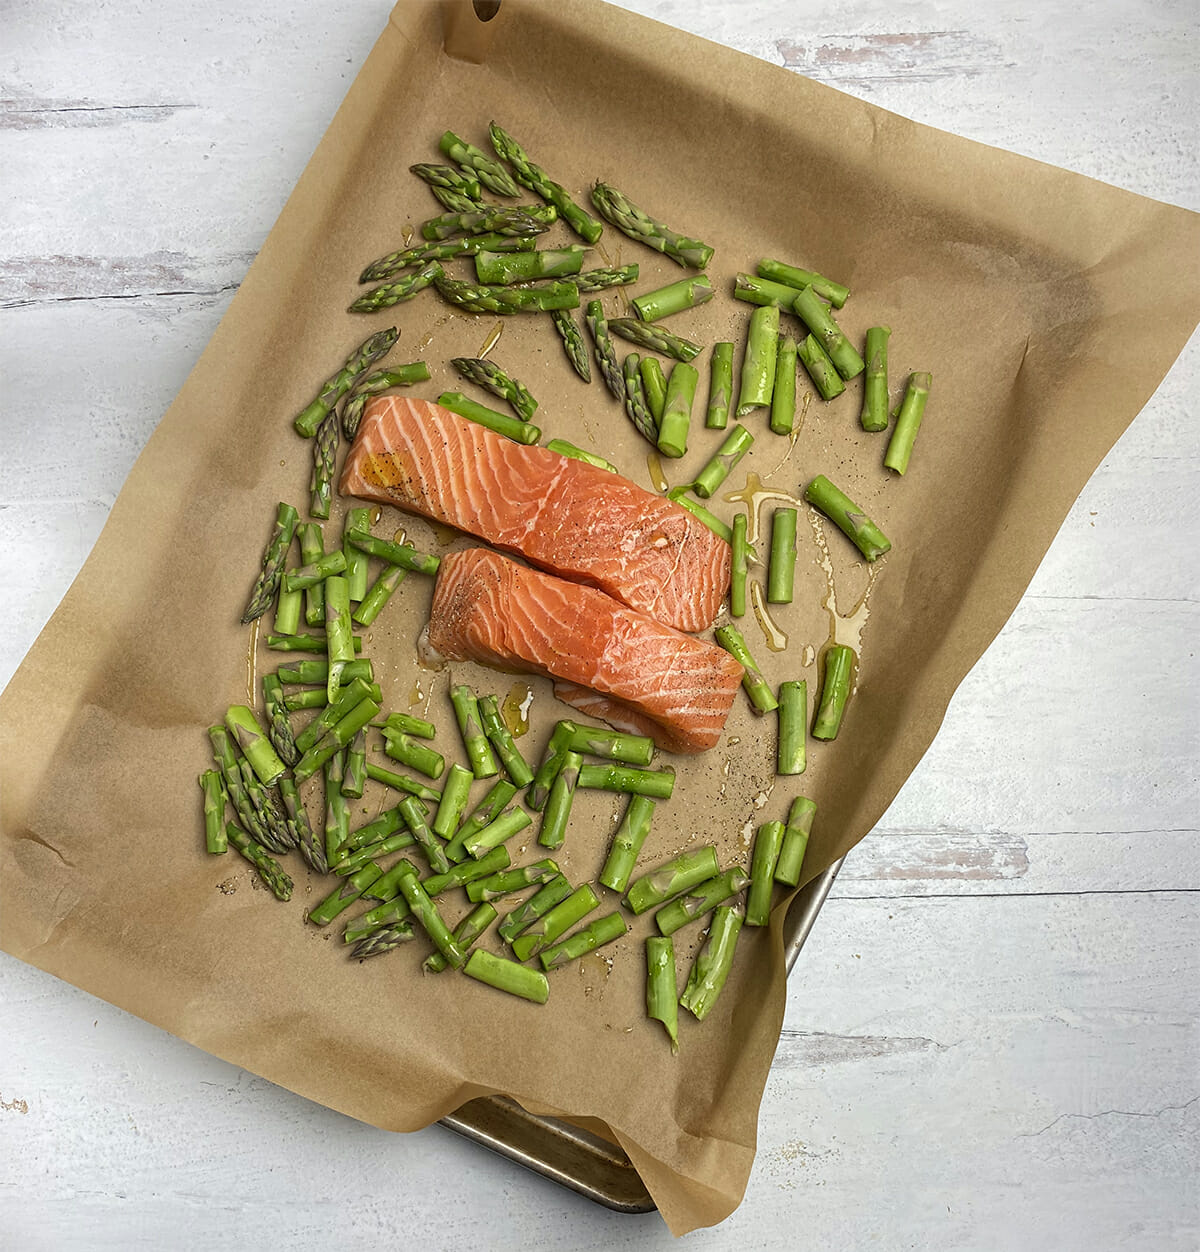 Salmon filets and cut up asparagus on a baking sheet covered with parchment paper, ready for the oven.